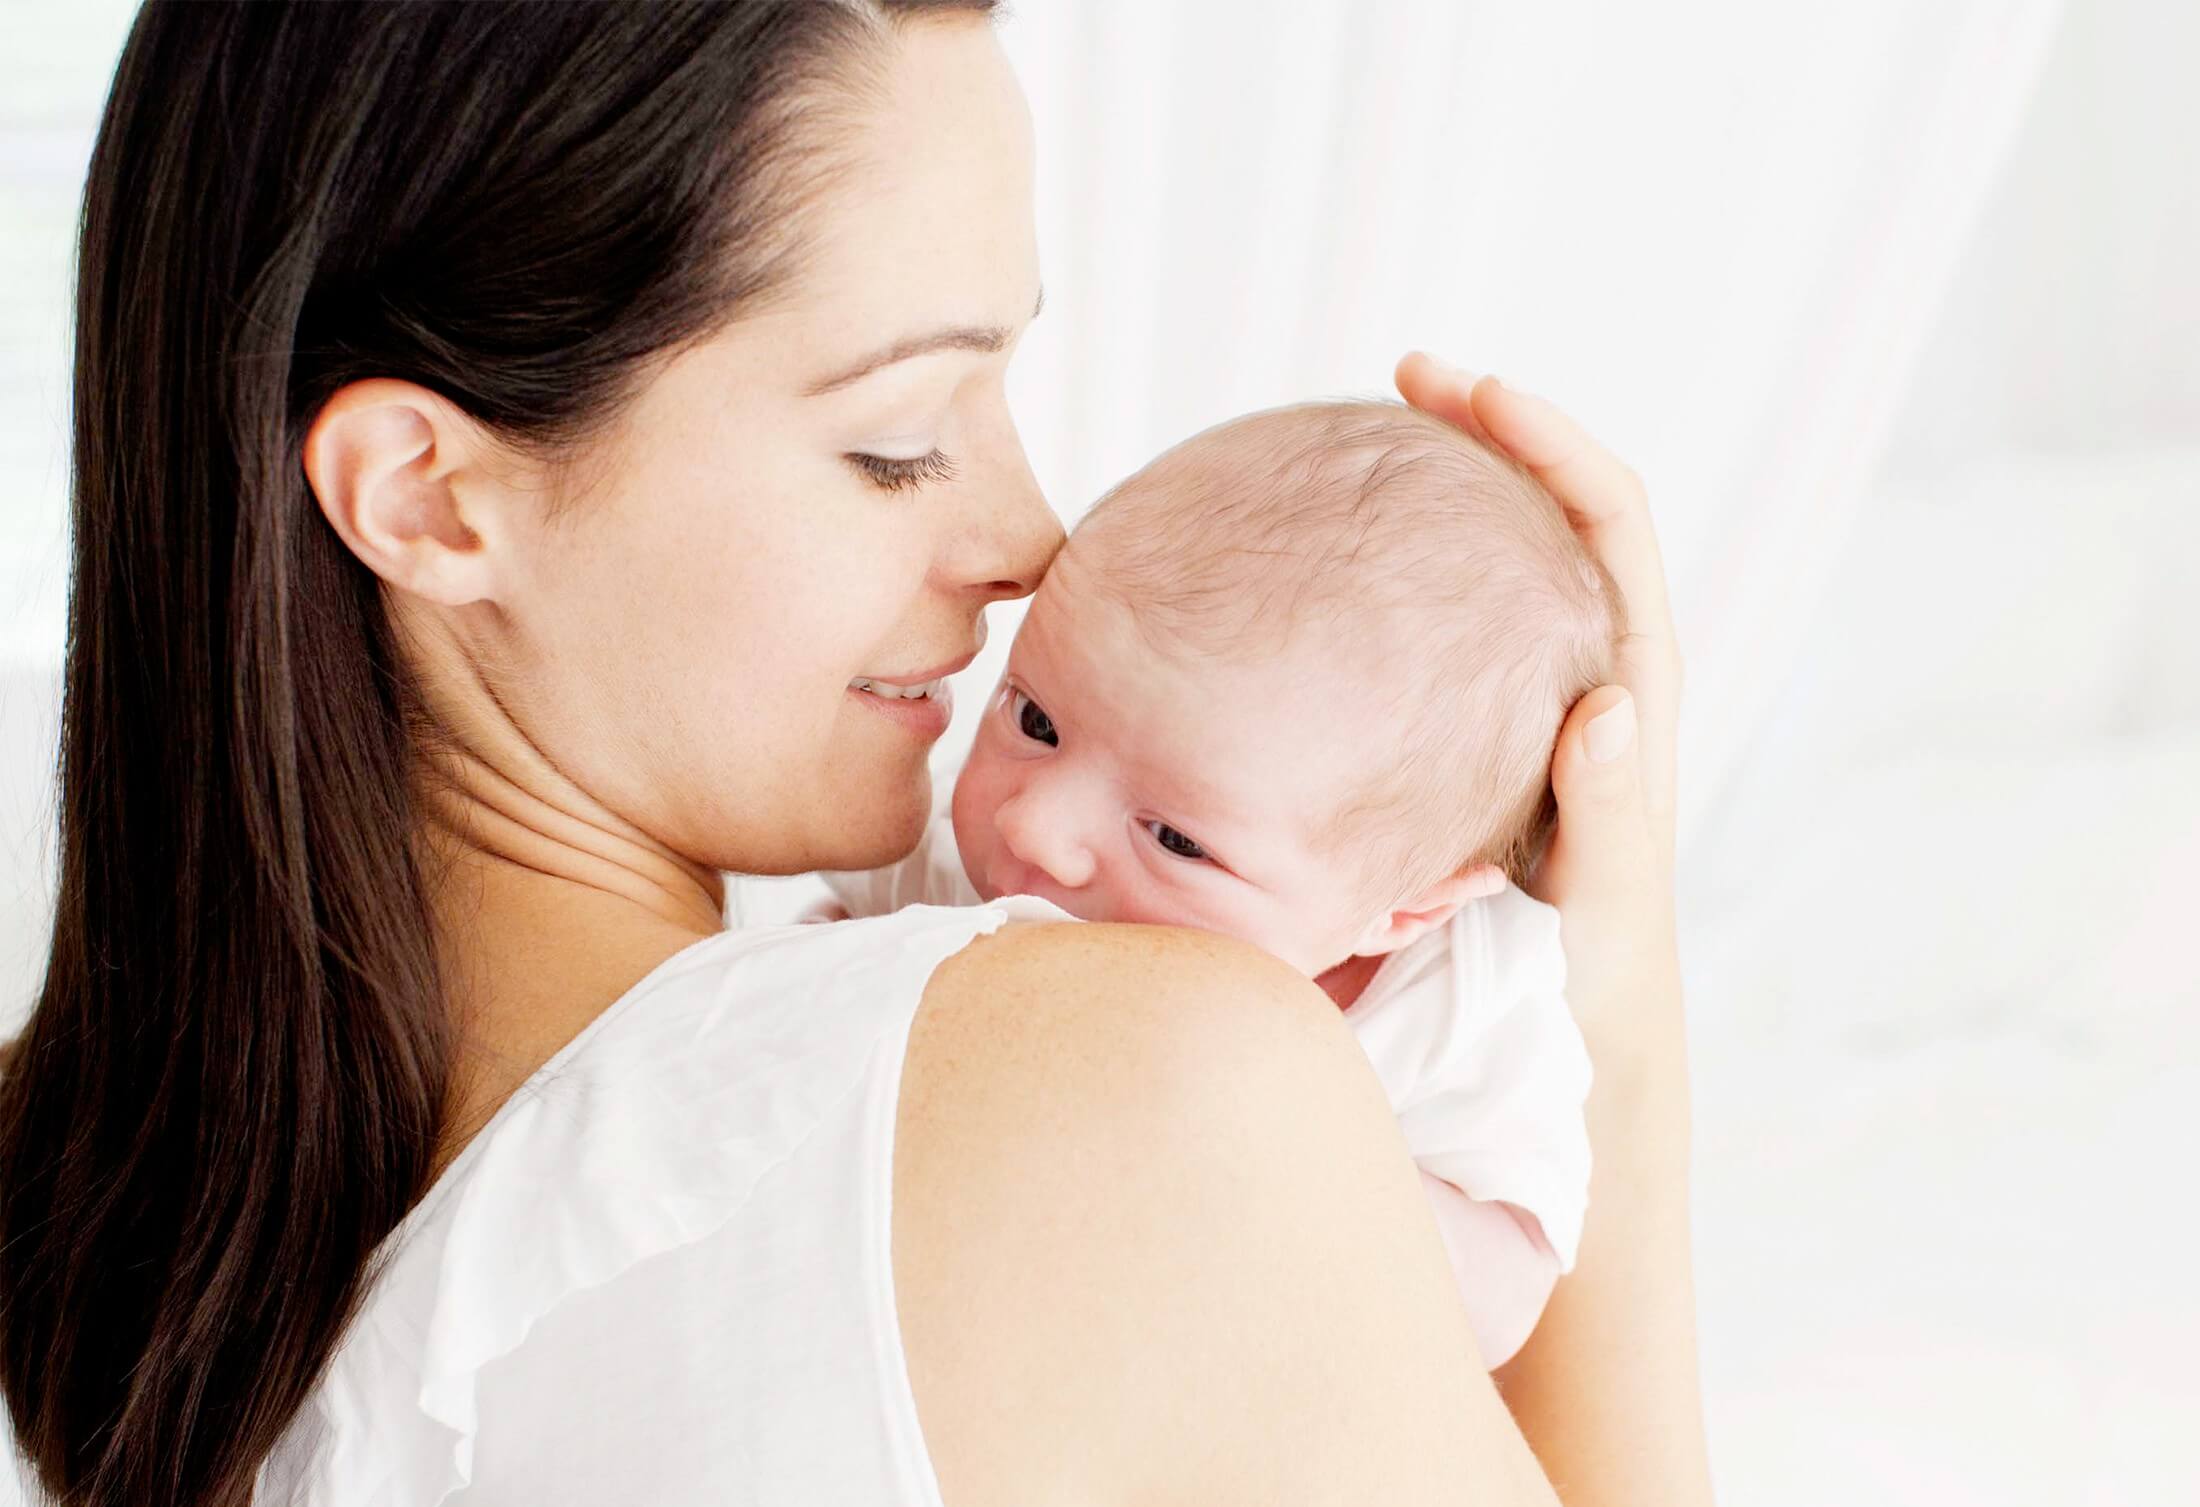 7 ways to have a good bond with your baby